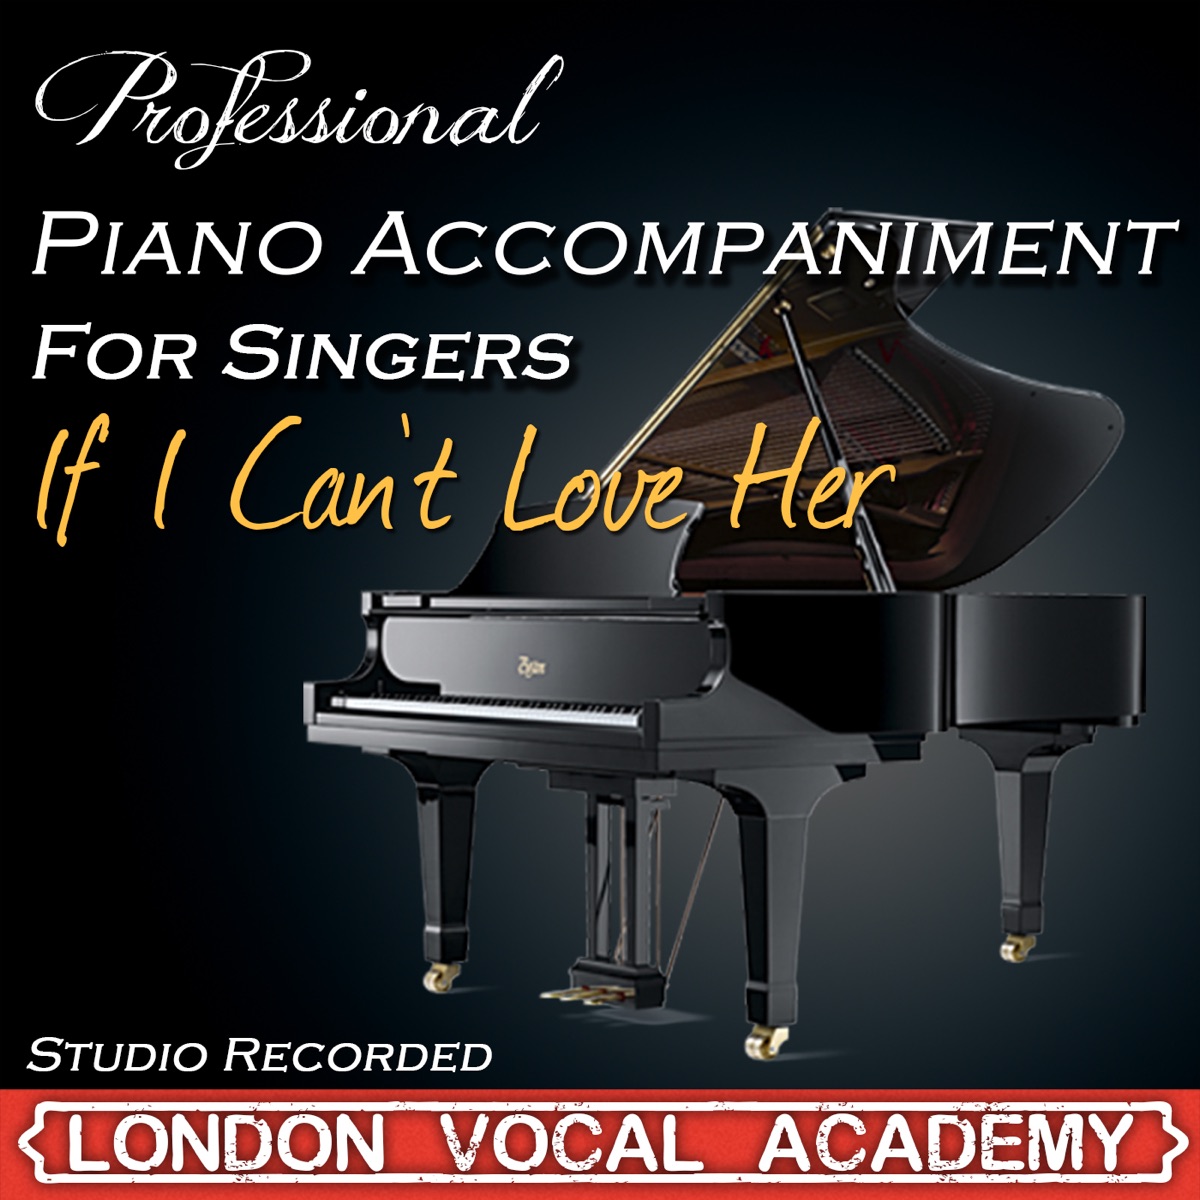 Professional Piano Accompaniment For Singers, Vol. 4 (Karaoke Backing  Track) by London Vocal Academy on Apple Music